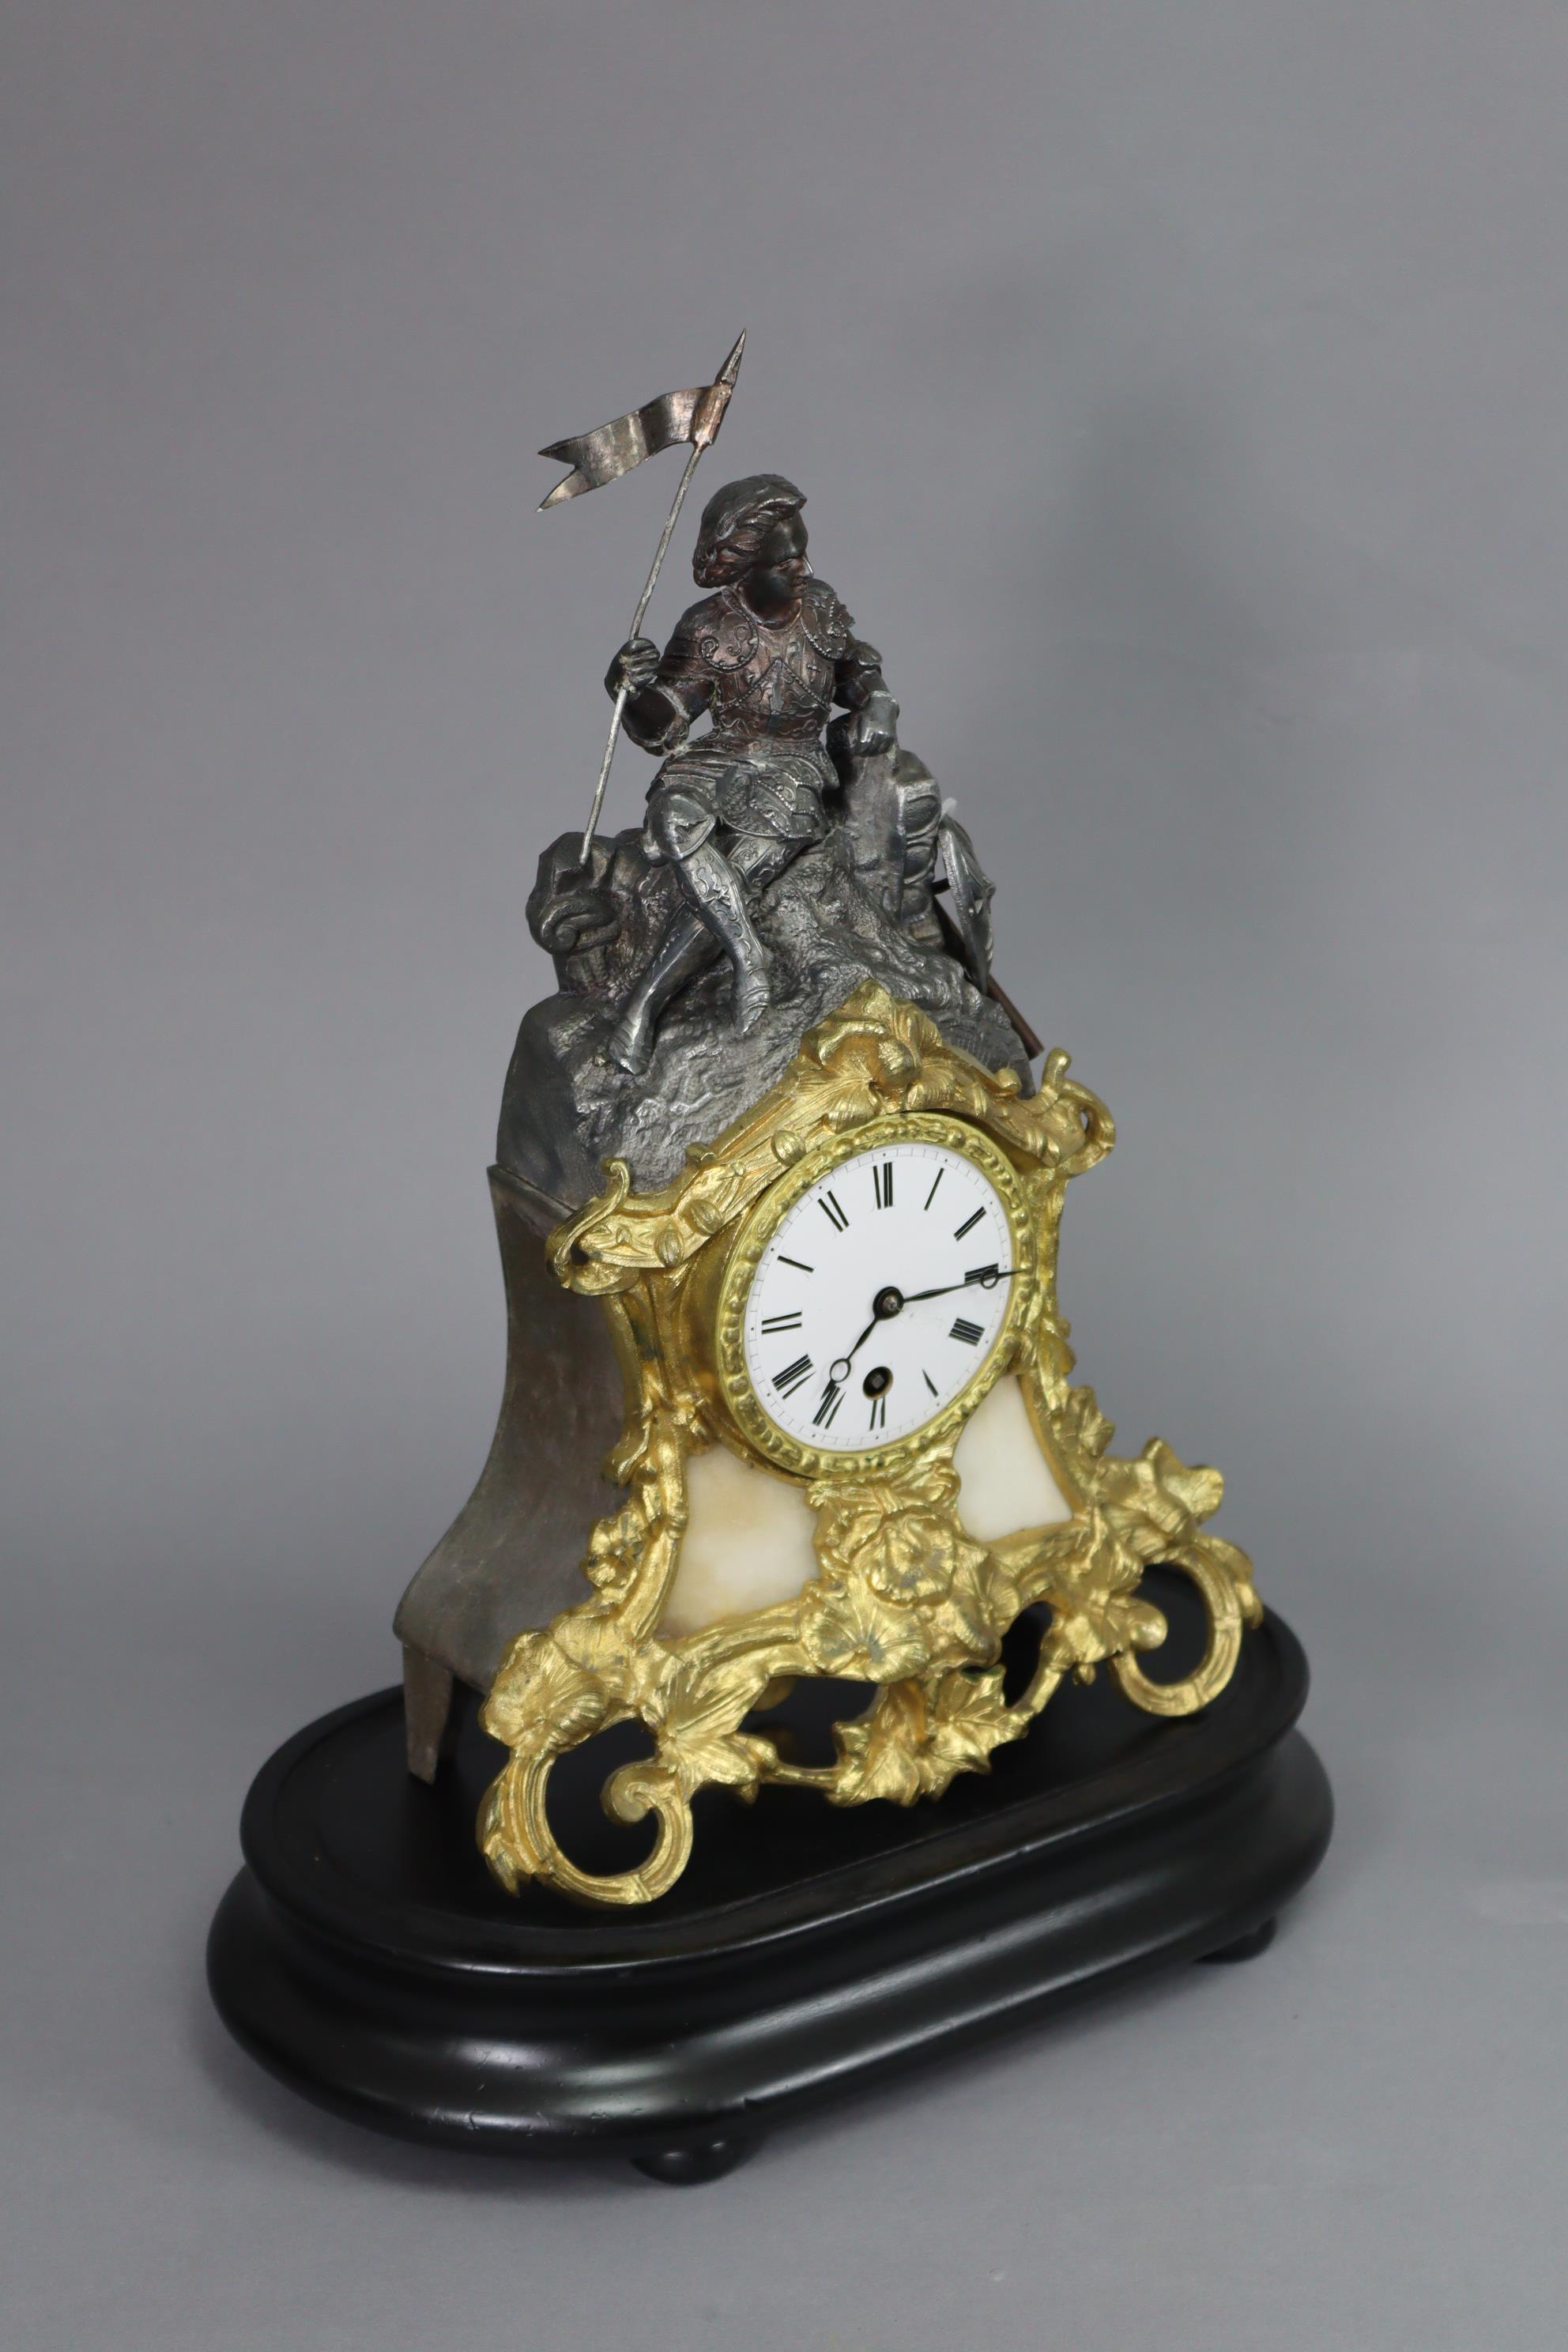 A 19th century French mantel clock in speltre figural case with pierced gilt-metal rococo style - Image 2 of 3